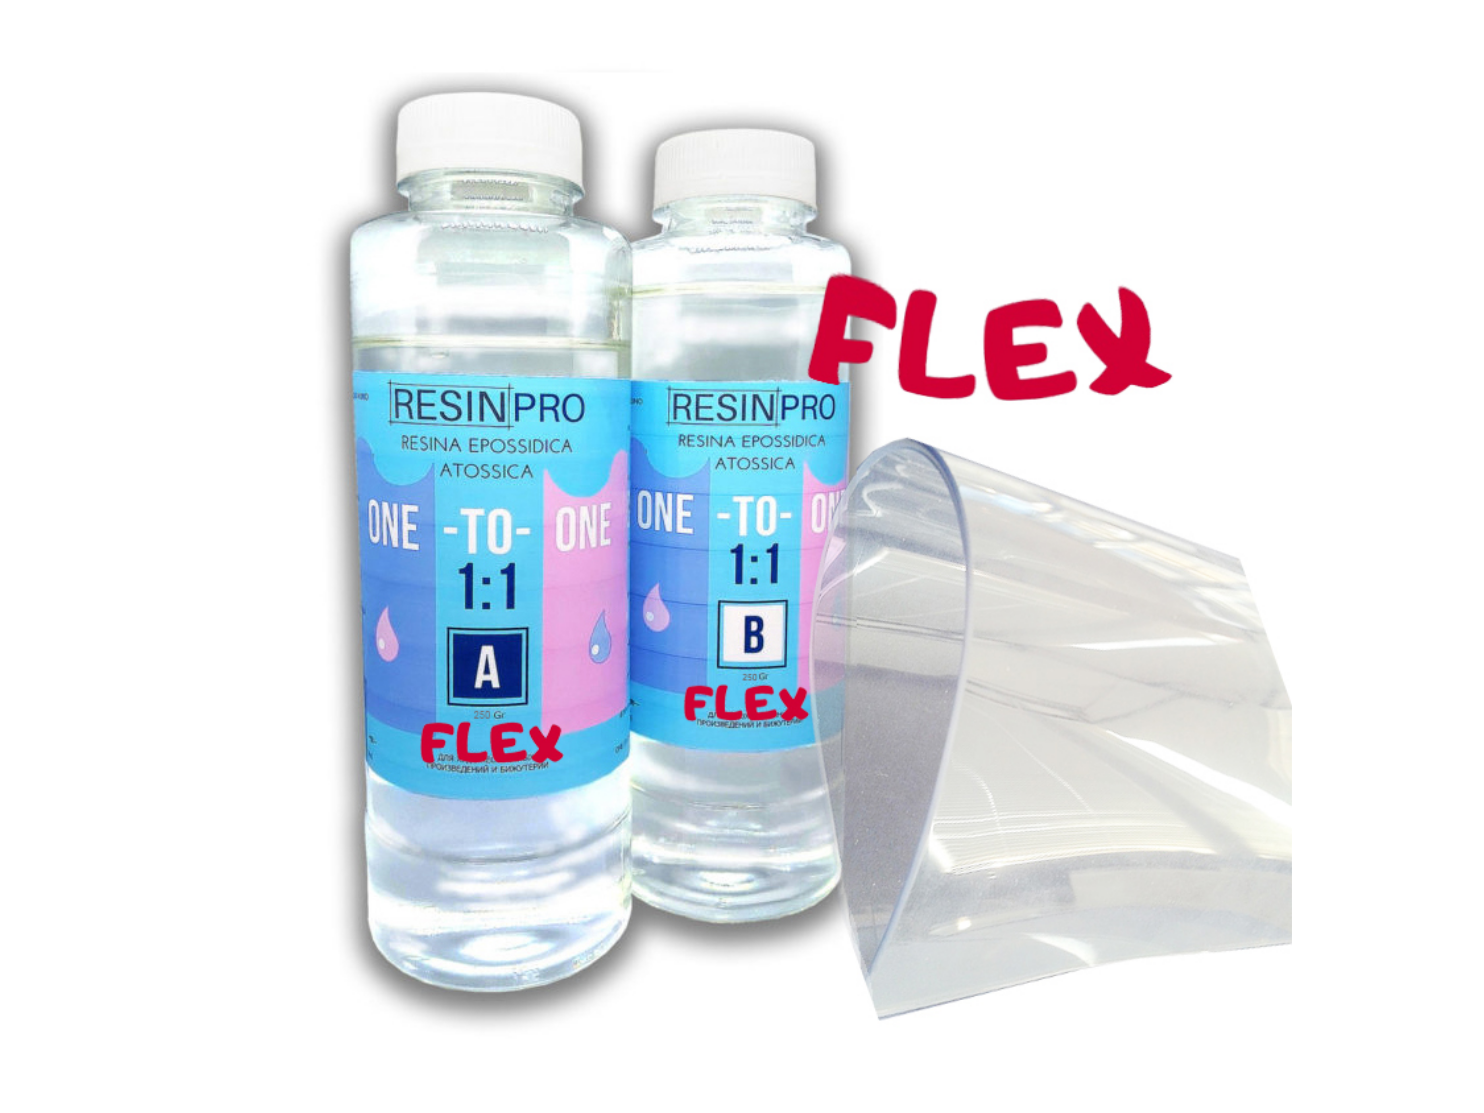 Resinpro ONE TO ONE 1:1 FLEX  Resina trasp. flessibile atossica 500 gr